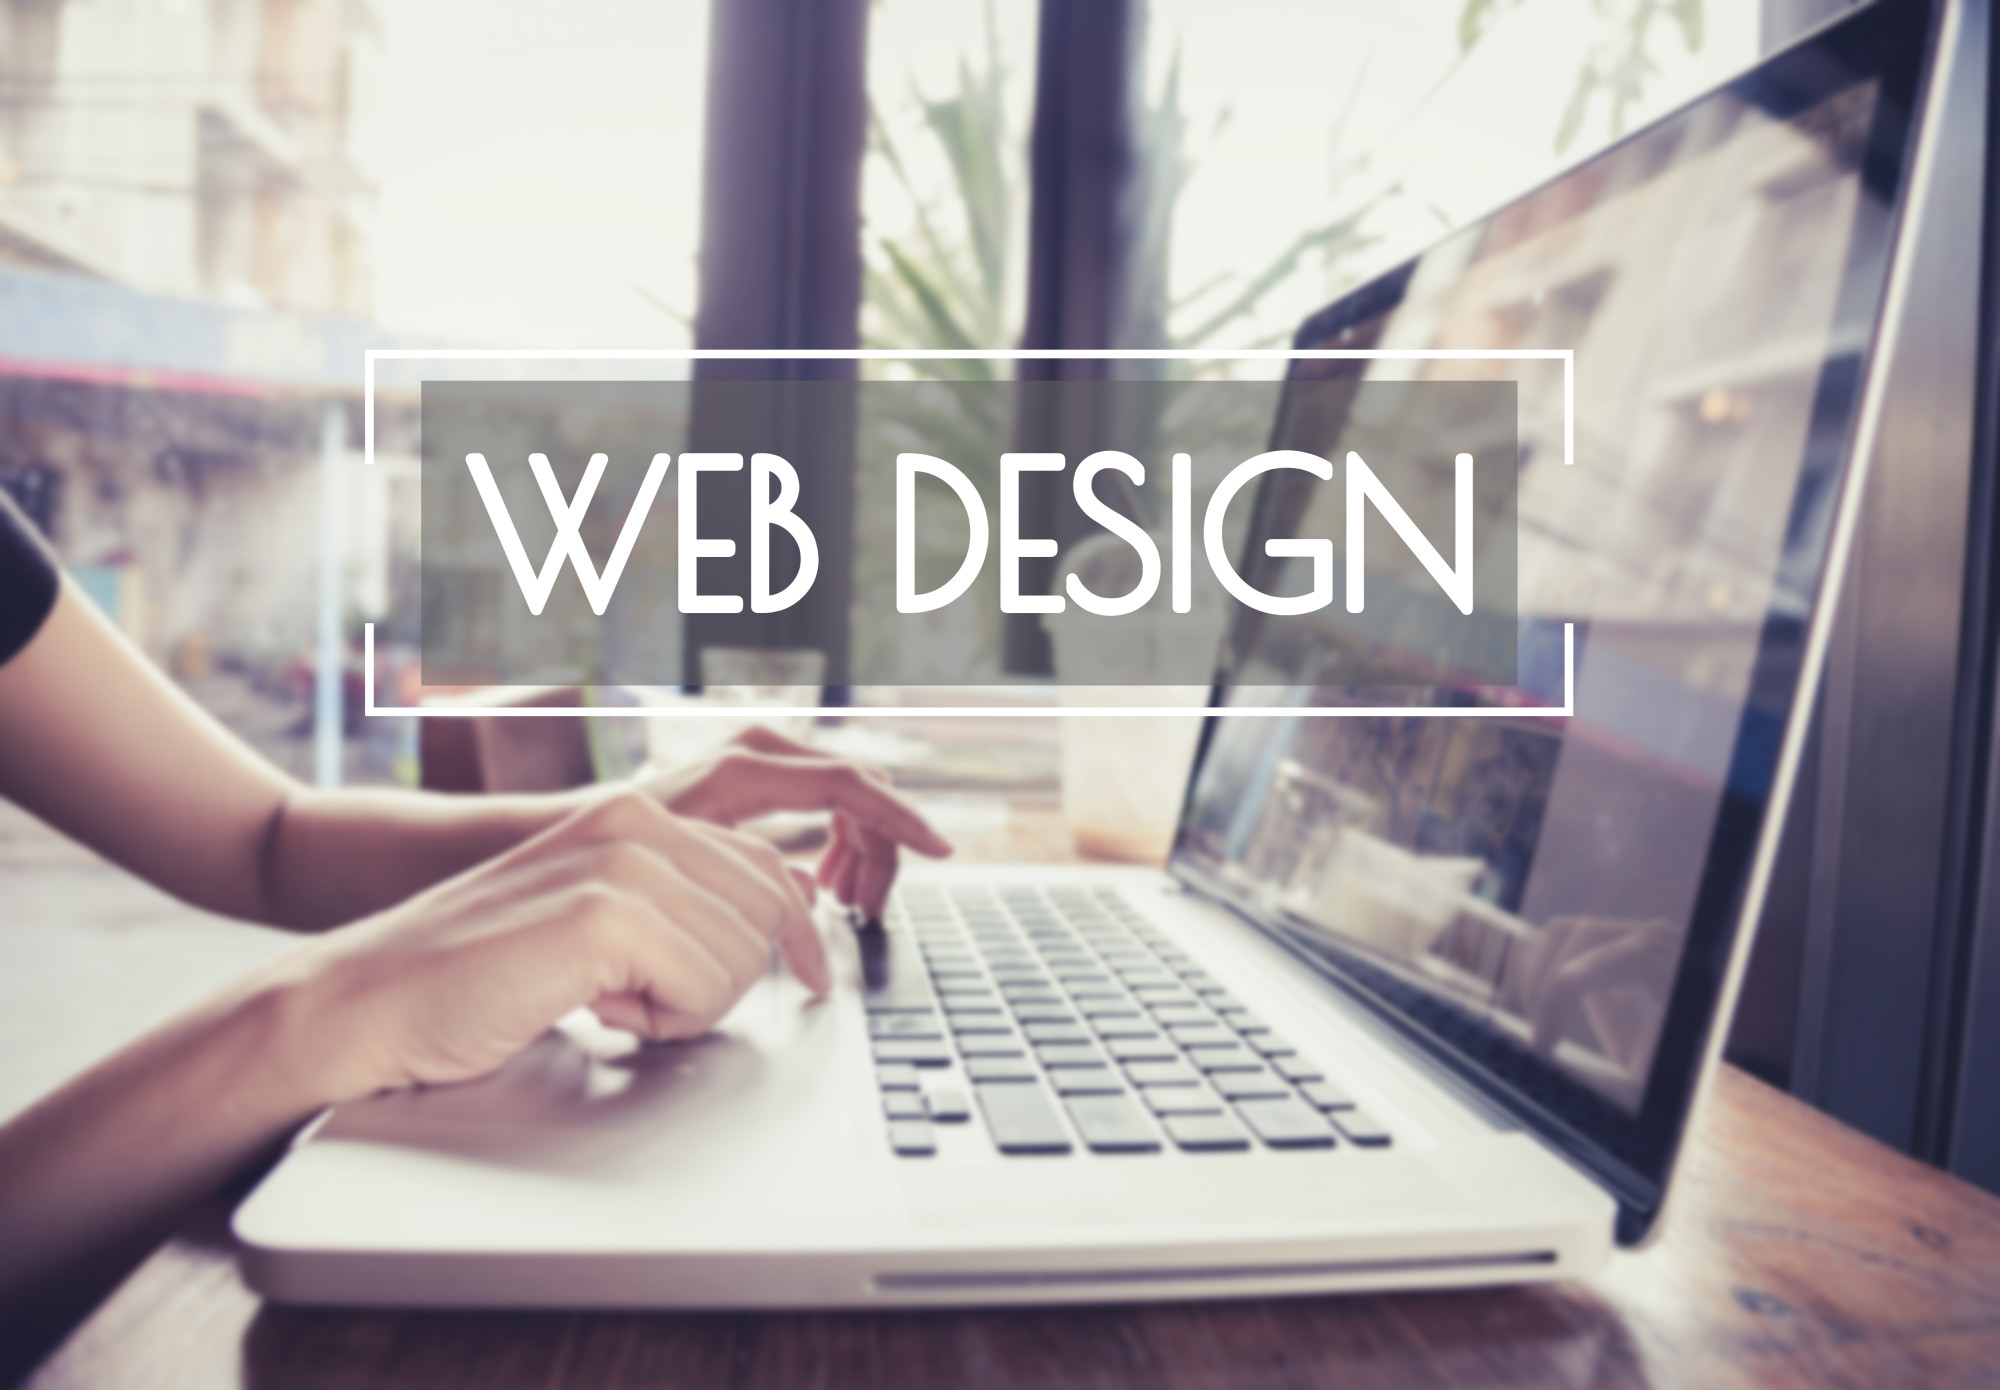 Here's How To Make Your Small Business Website Design Fast And Stylish |  SiteUptime Blog